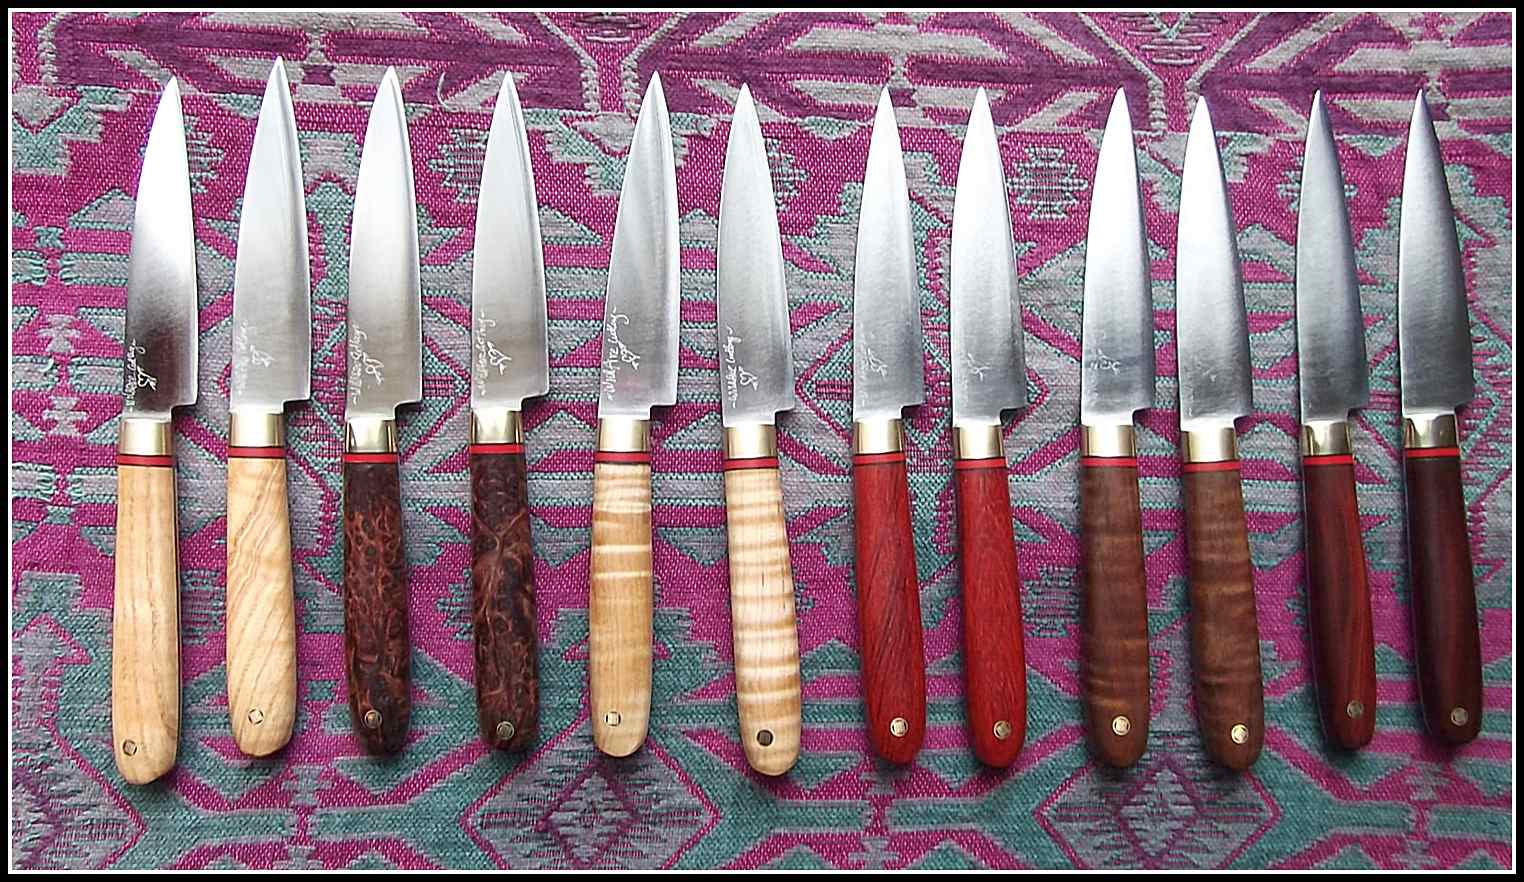 Two - six piece Steak Knife Sets, featuring two knives per wood species